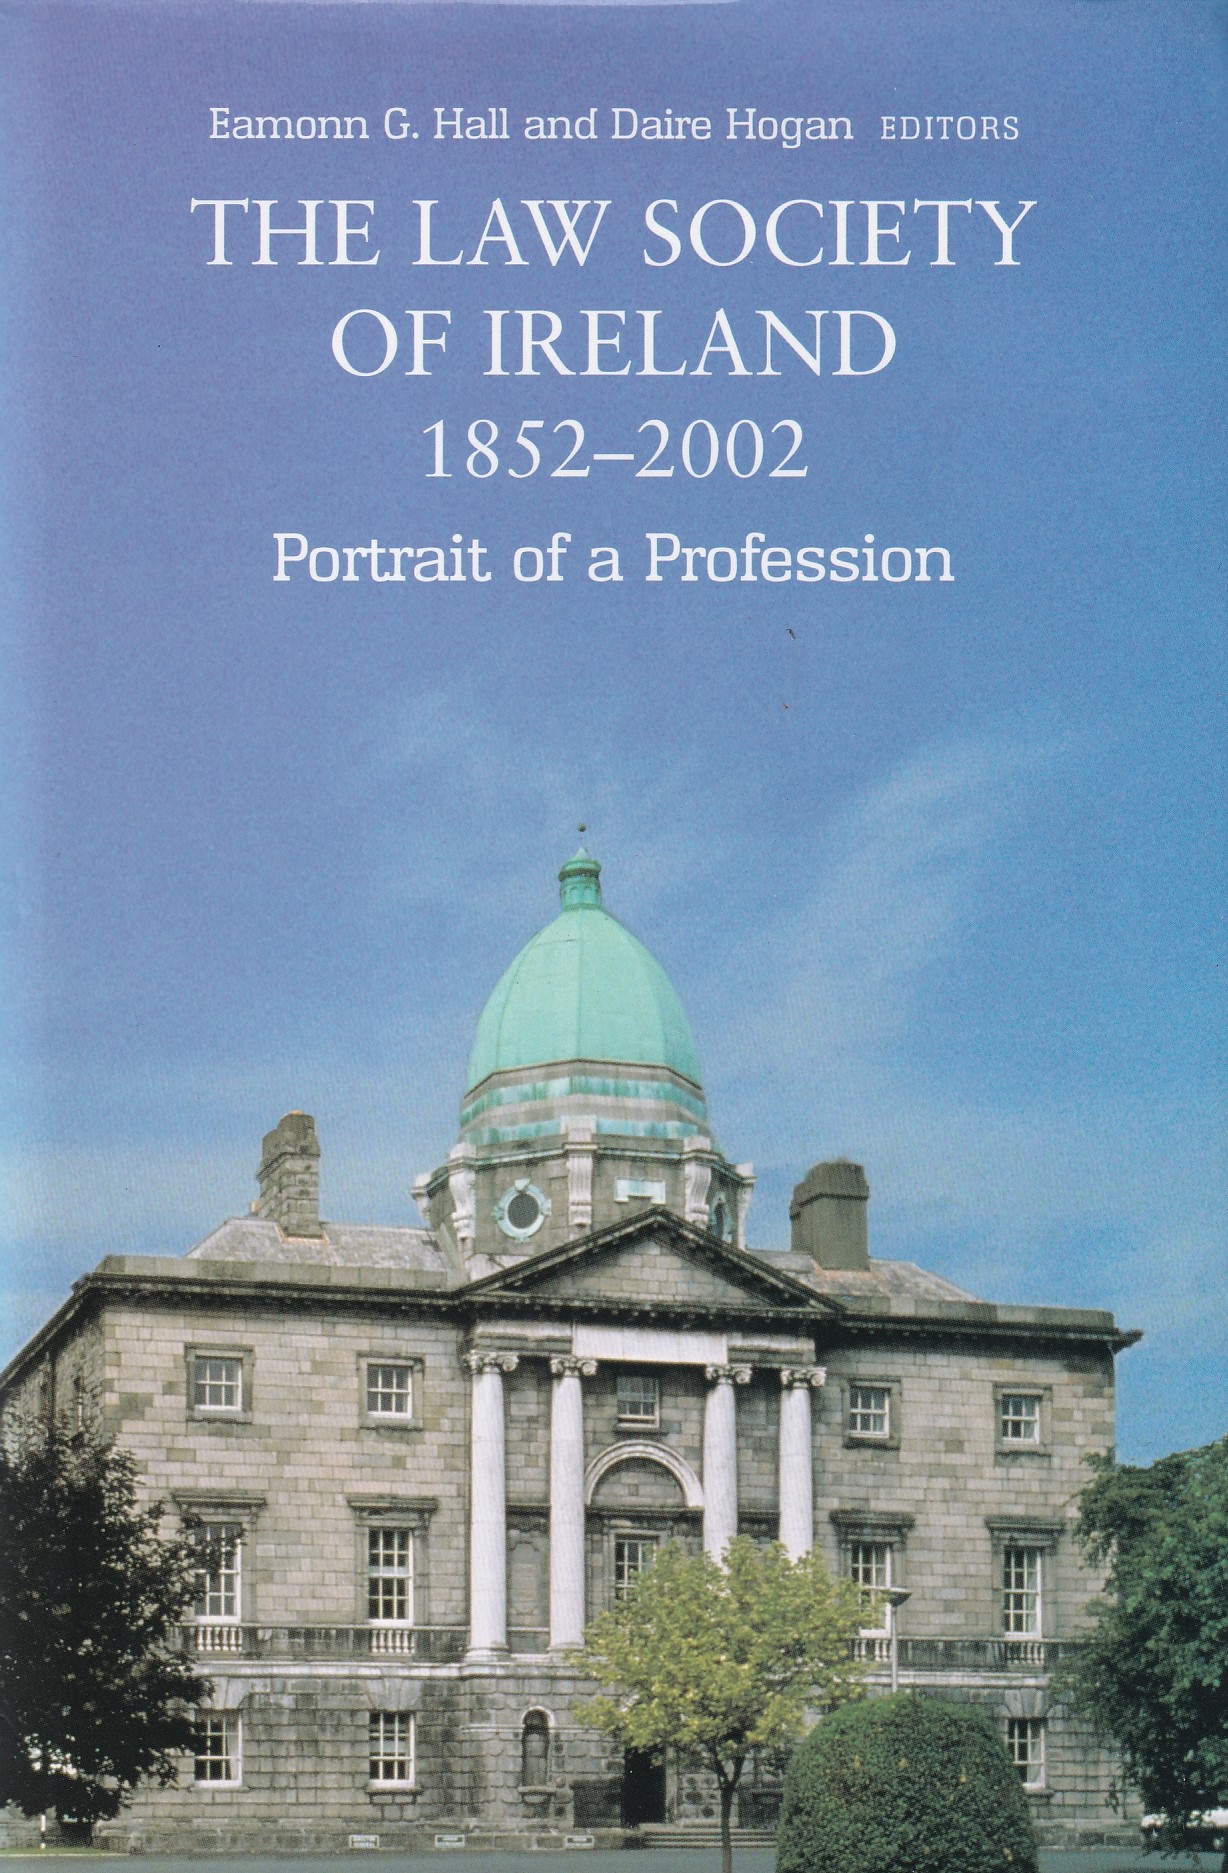 The Law Society of Ireland, 1851-2001: Portrait of a Profession | Eamonn G. Hall & Daire Hogan, eds | Charlie Byrne's